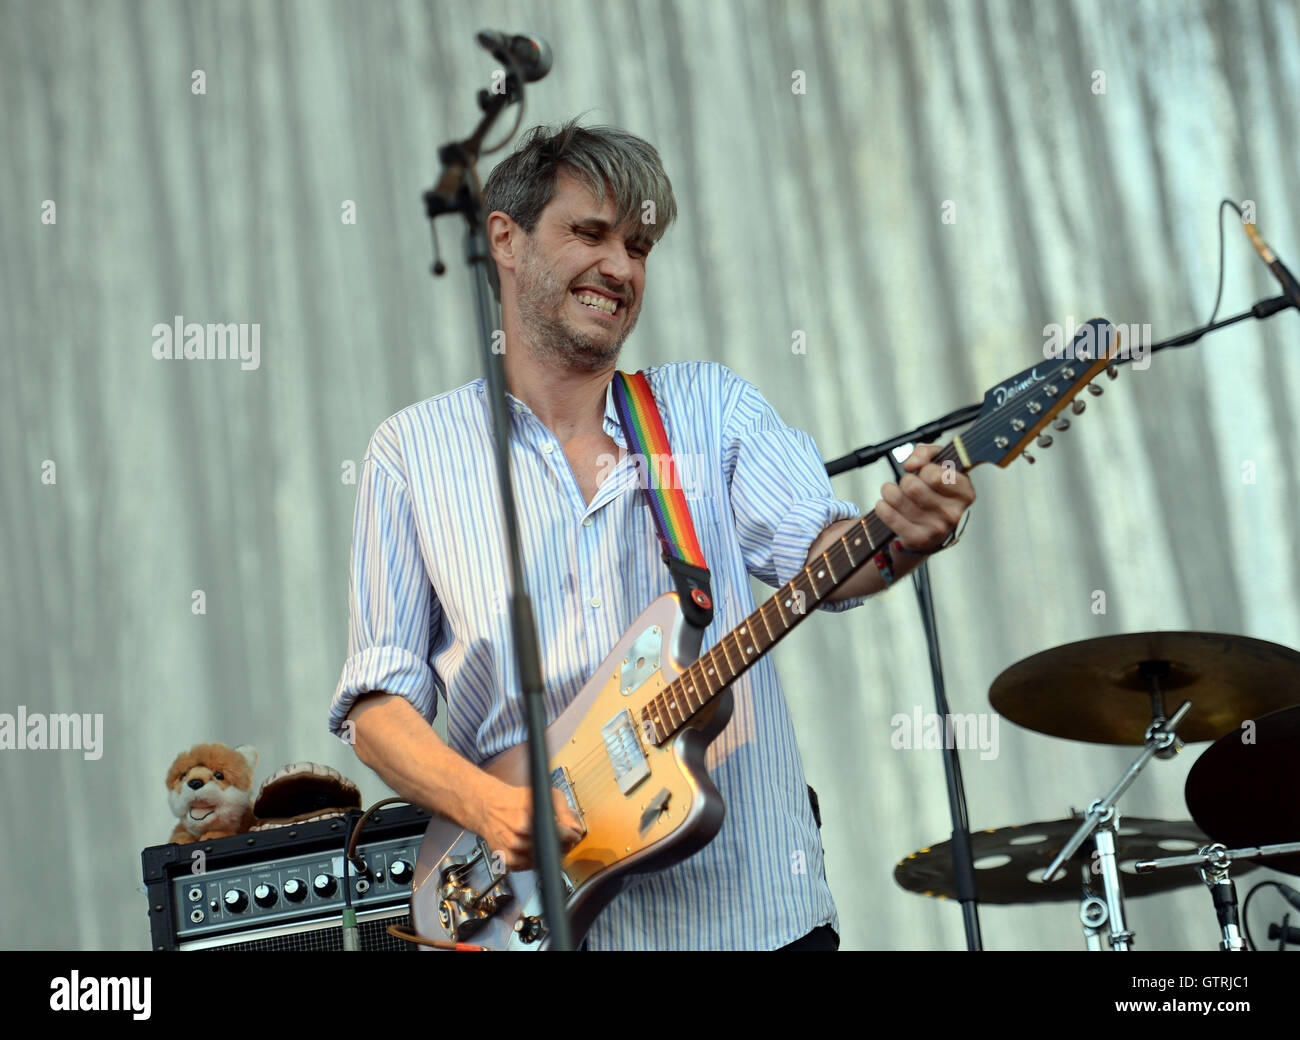 Berlin, Germany. 10th Sep, 2016. Singer Dirk von Lowtzow of the German band Tocotronic performs at the music festival Lollapalooza in Berlin, Germany, 10 September 2016. PHOTO: BRITTA PEDERSEN/dpa/Alamy Live News Stock Photo